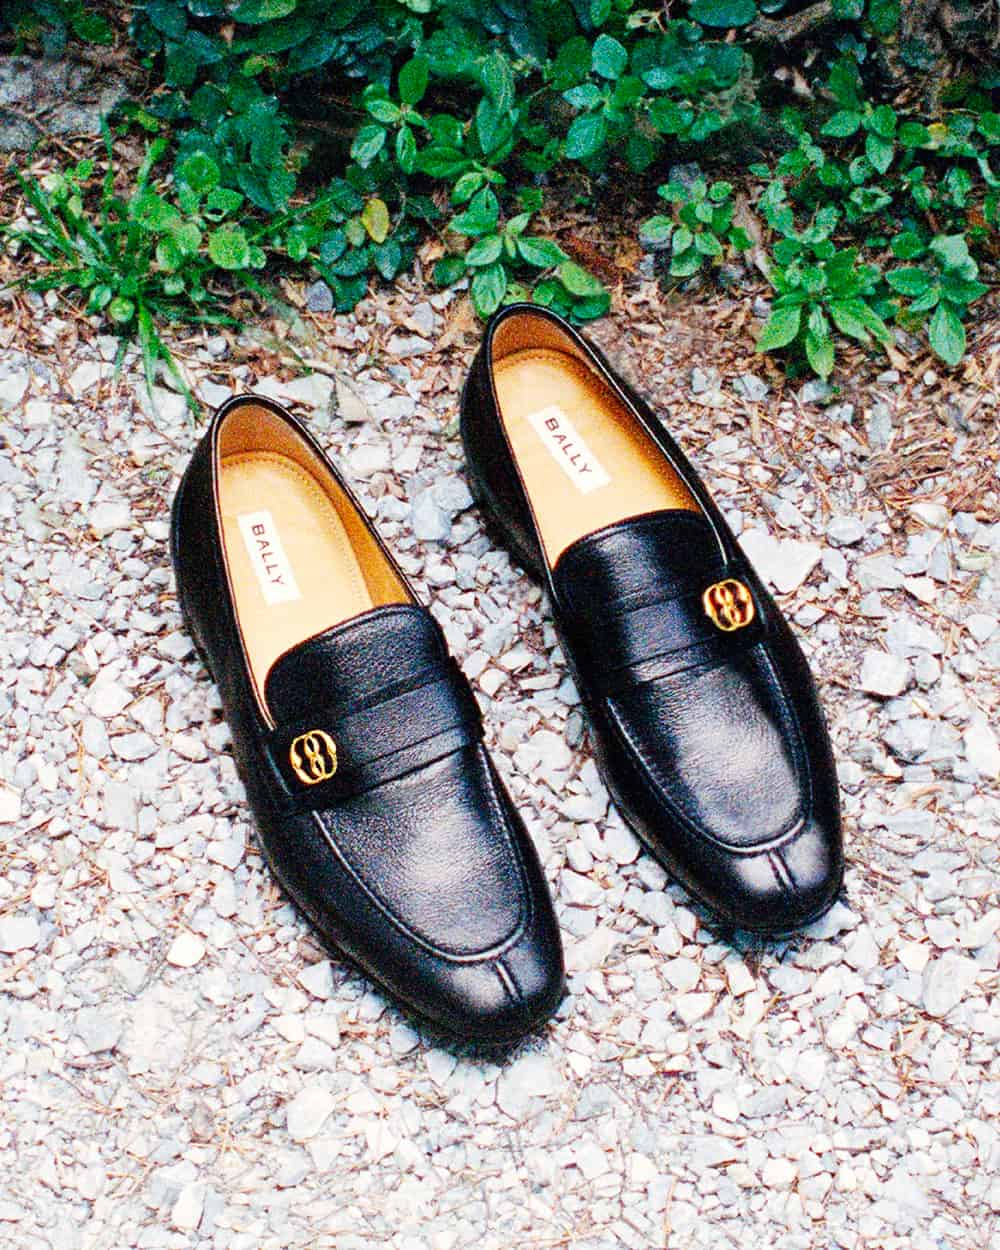 A pair of luxury men's Bally black leather loafers with gold logo on stones outside